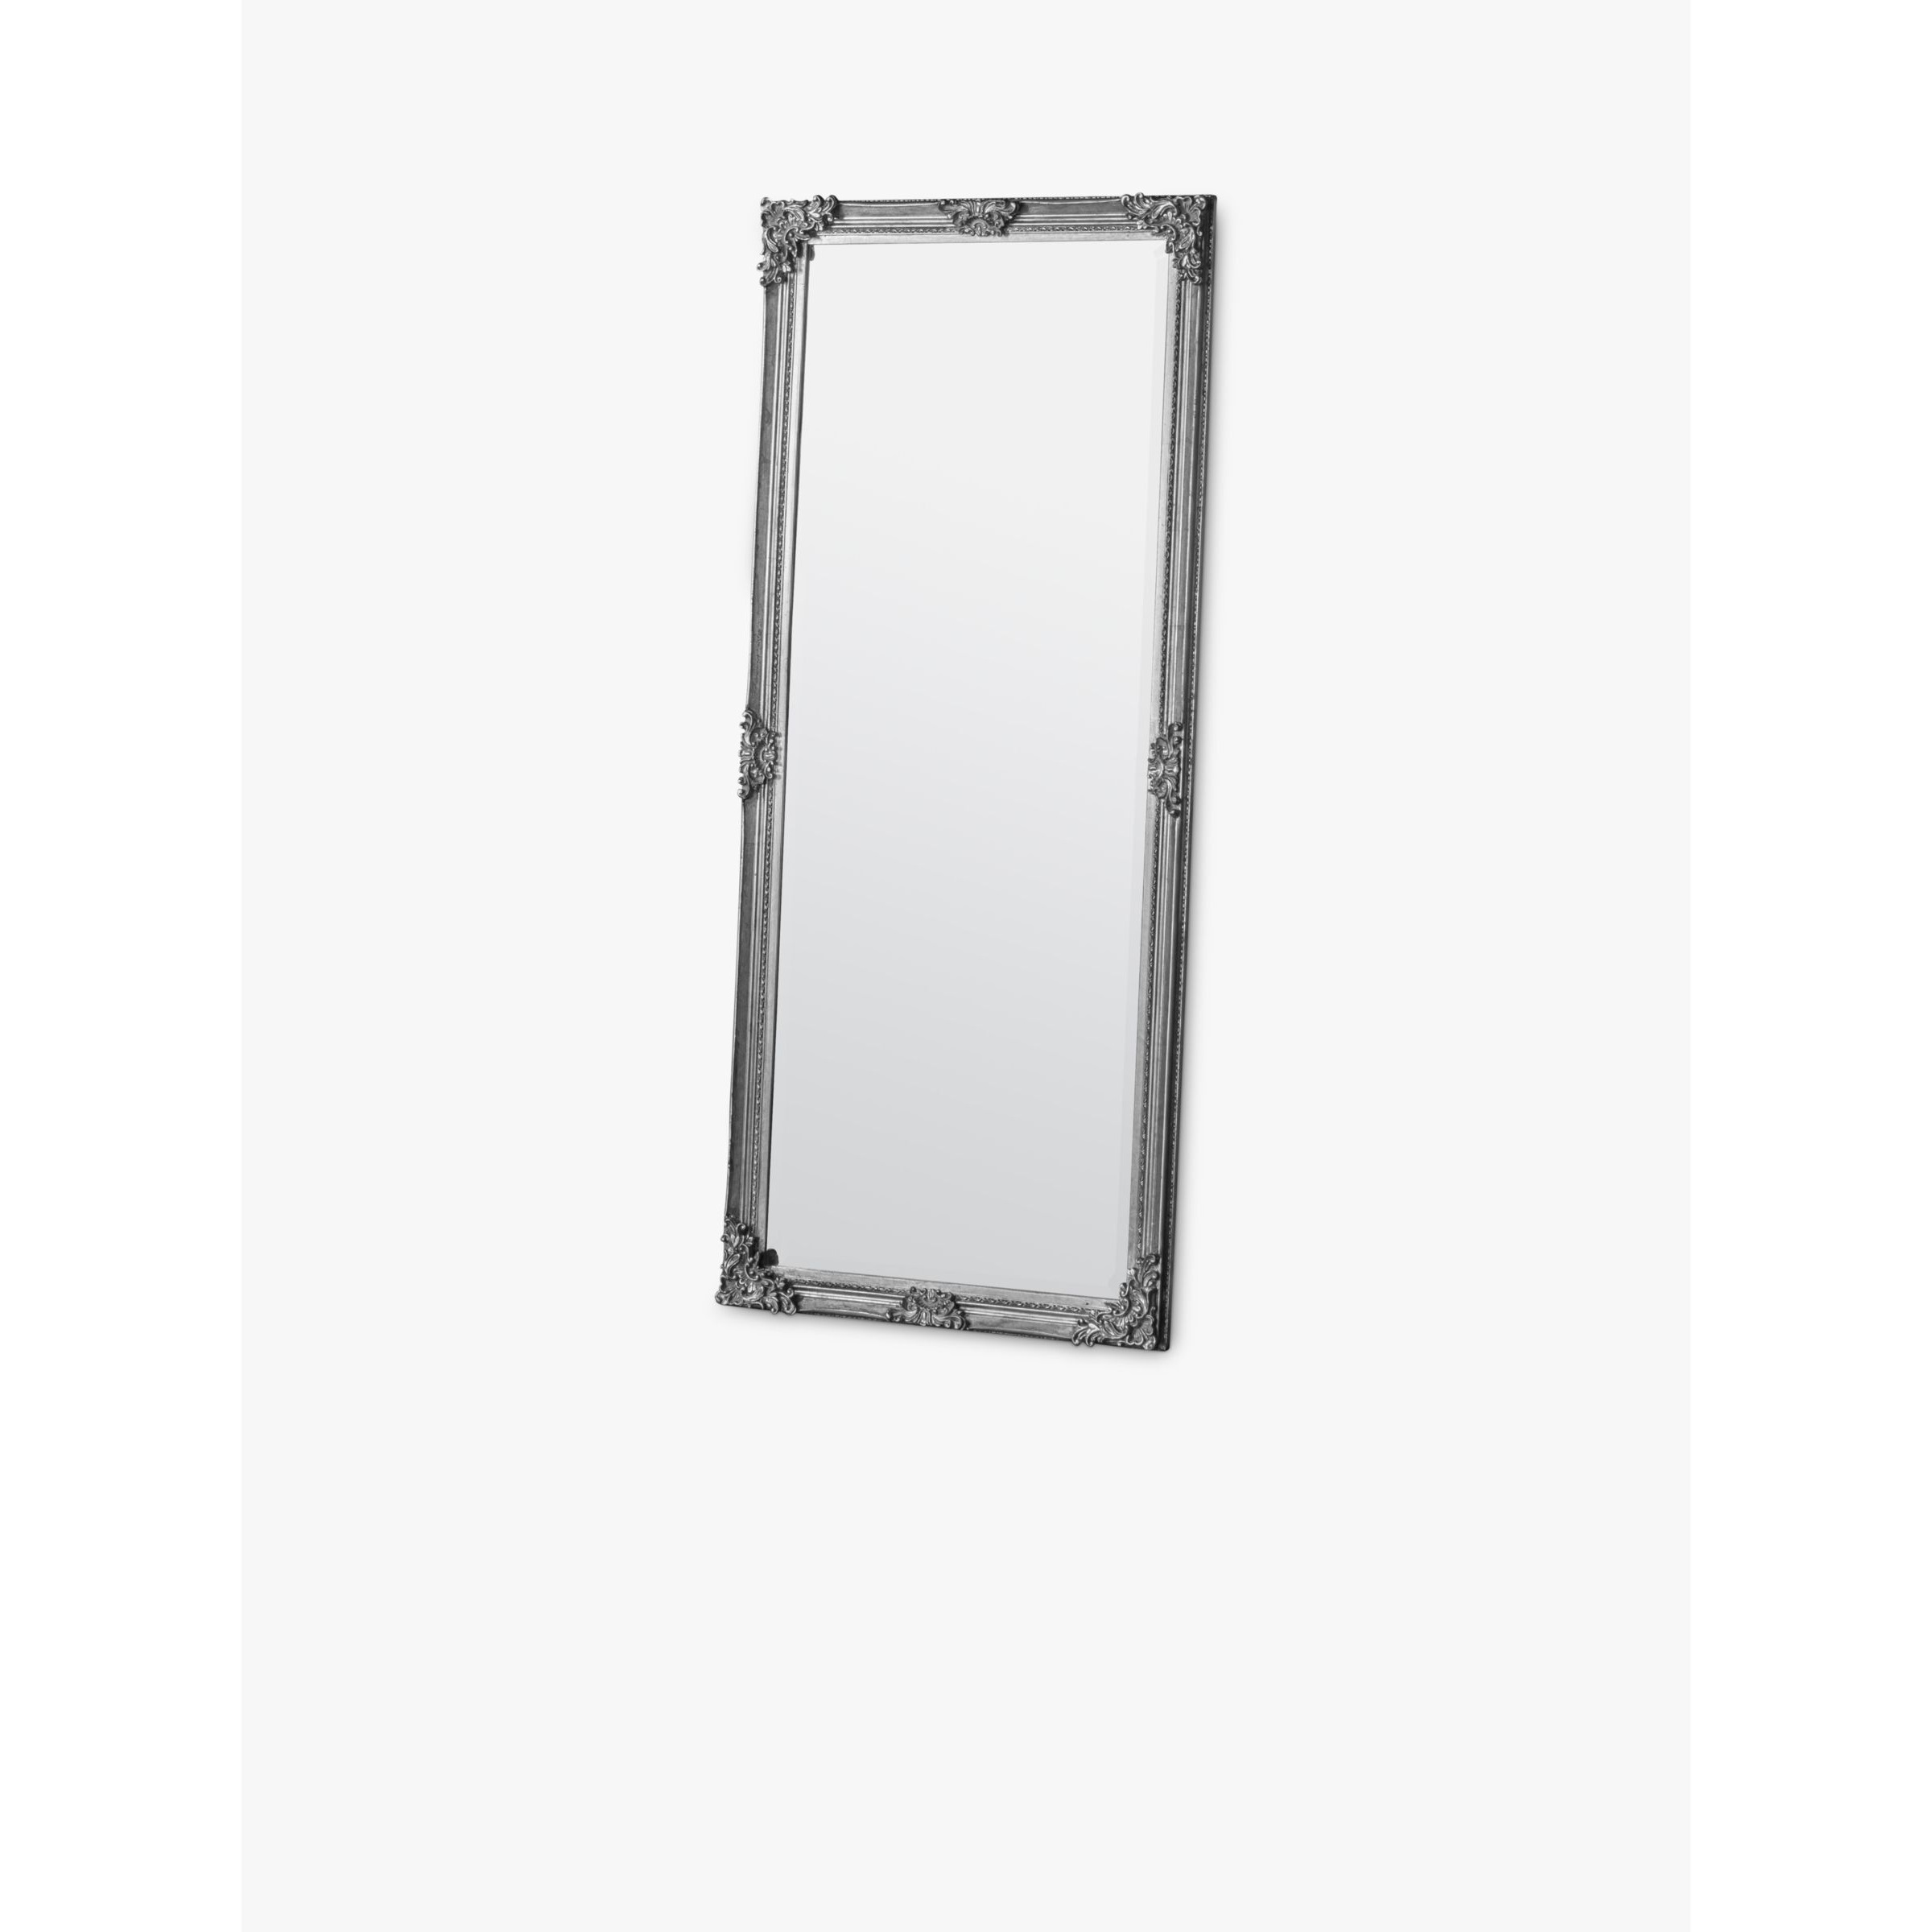 Gallery Direct Fiennes Rectangular Decorative Frame Leaner / Wall Mirror, 160 x 70cm - image 1